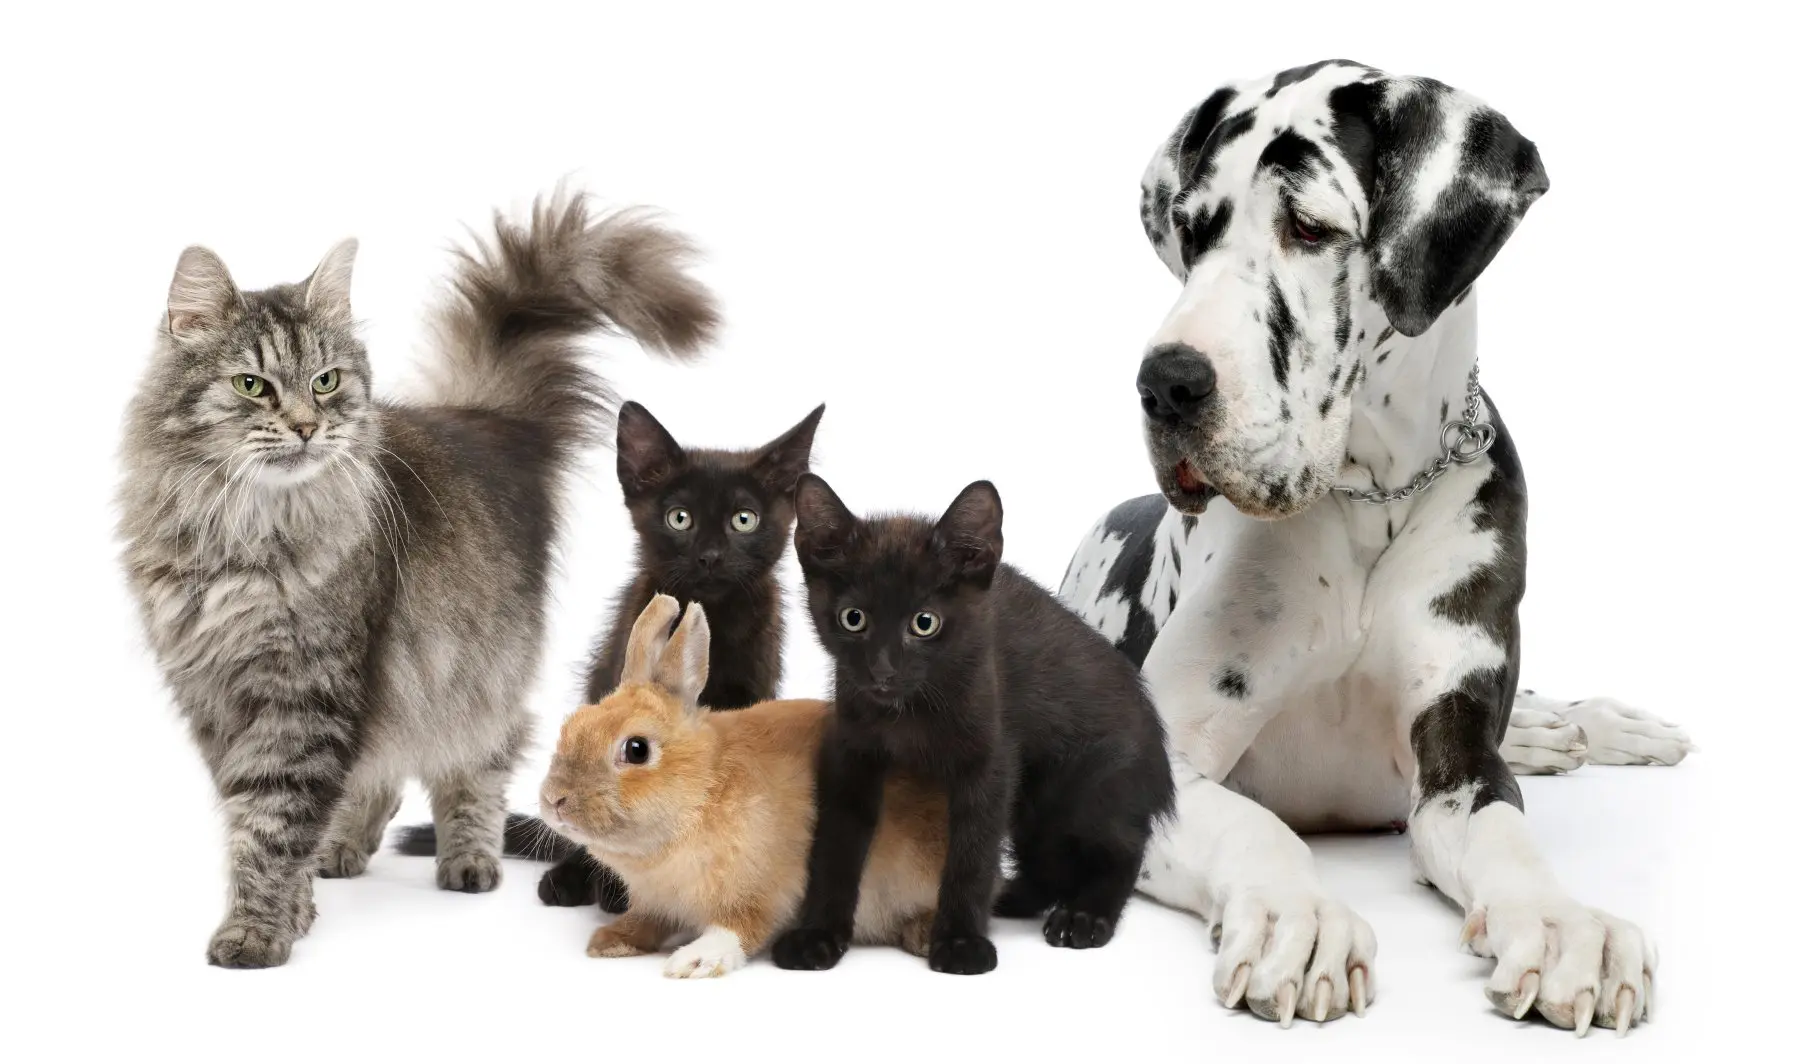 Striped cat, 2 black kittens, 1 tan rabbit and a black and white large dog laying on a white studio backdrop.